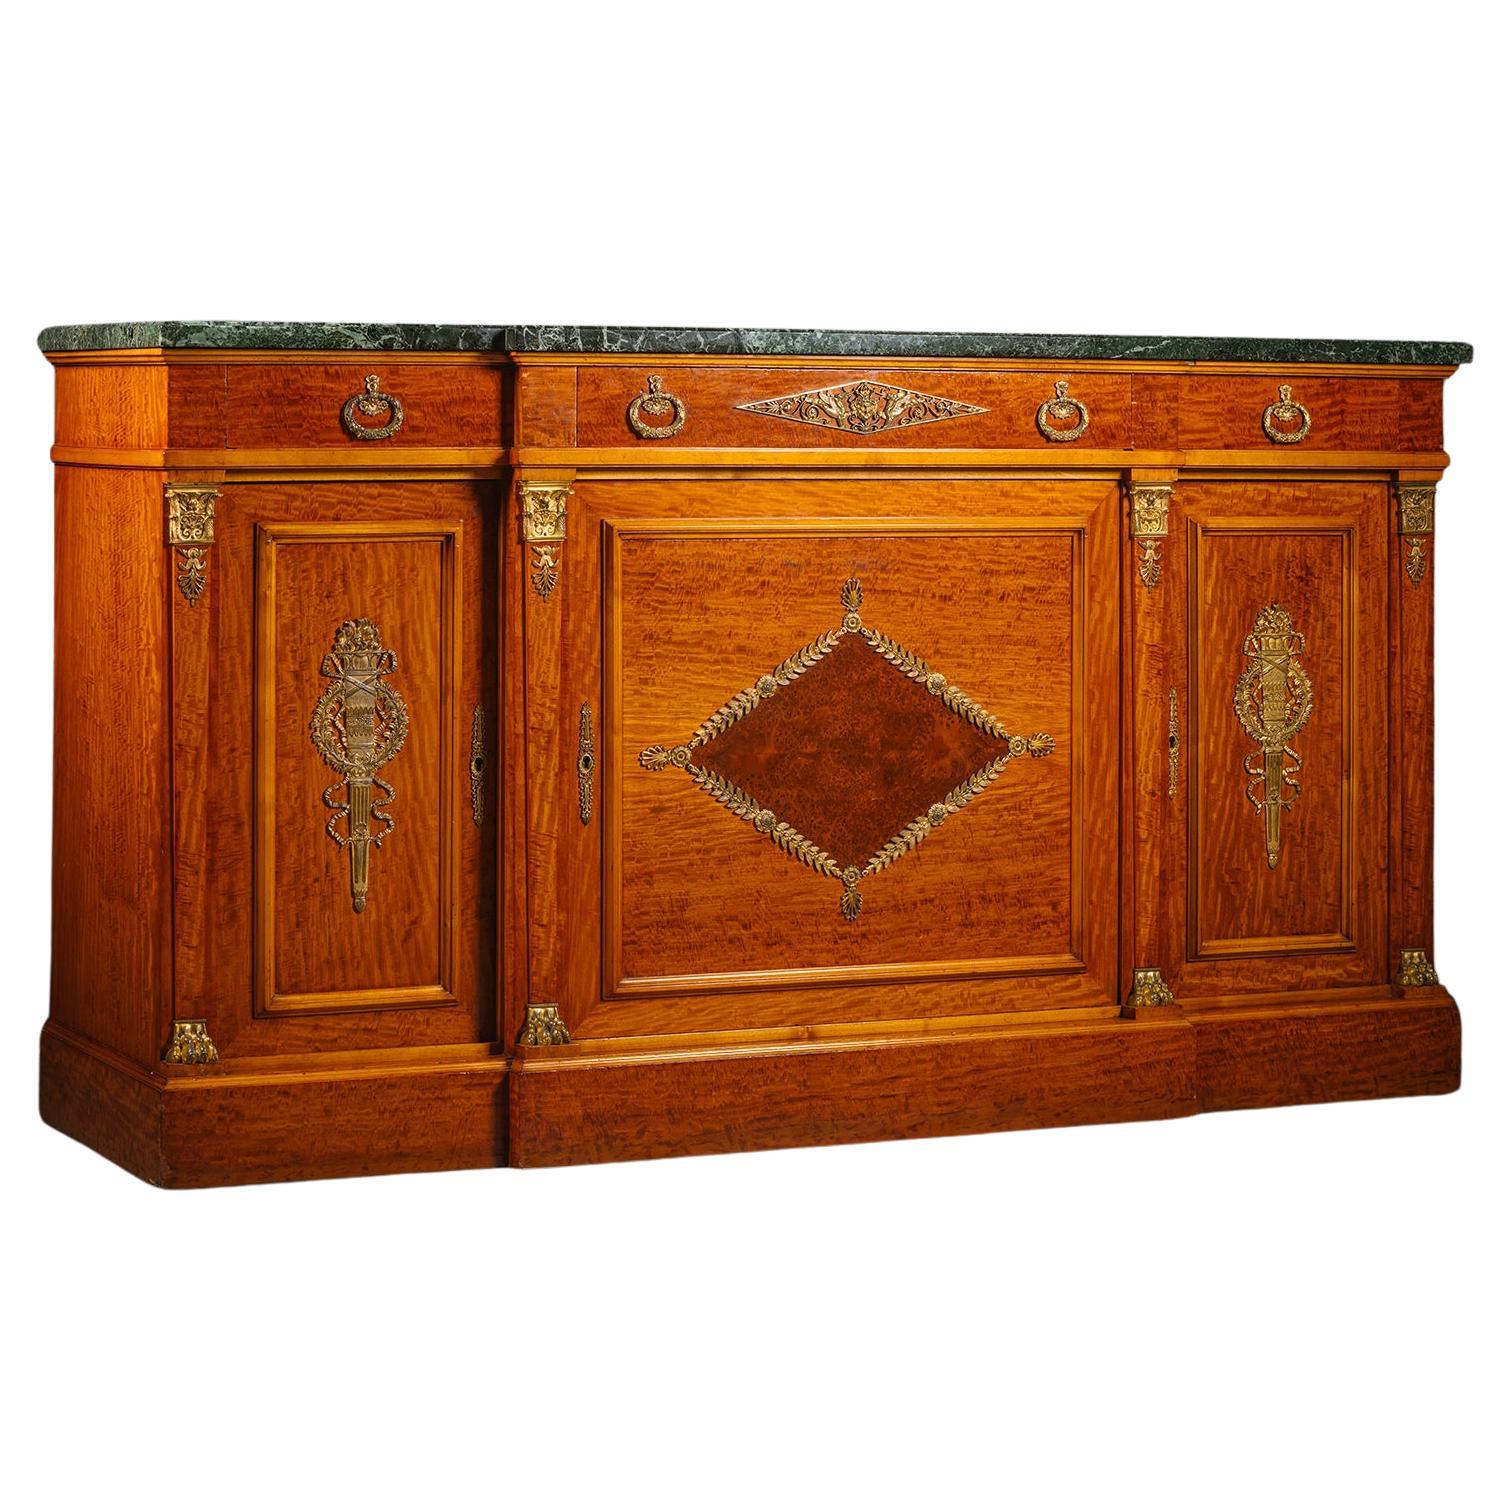 An Empire Style Gilt-Bronze Mounted Satinwood Buffet Cabinet